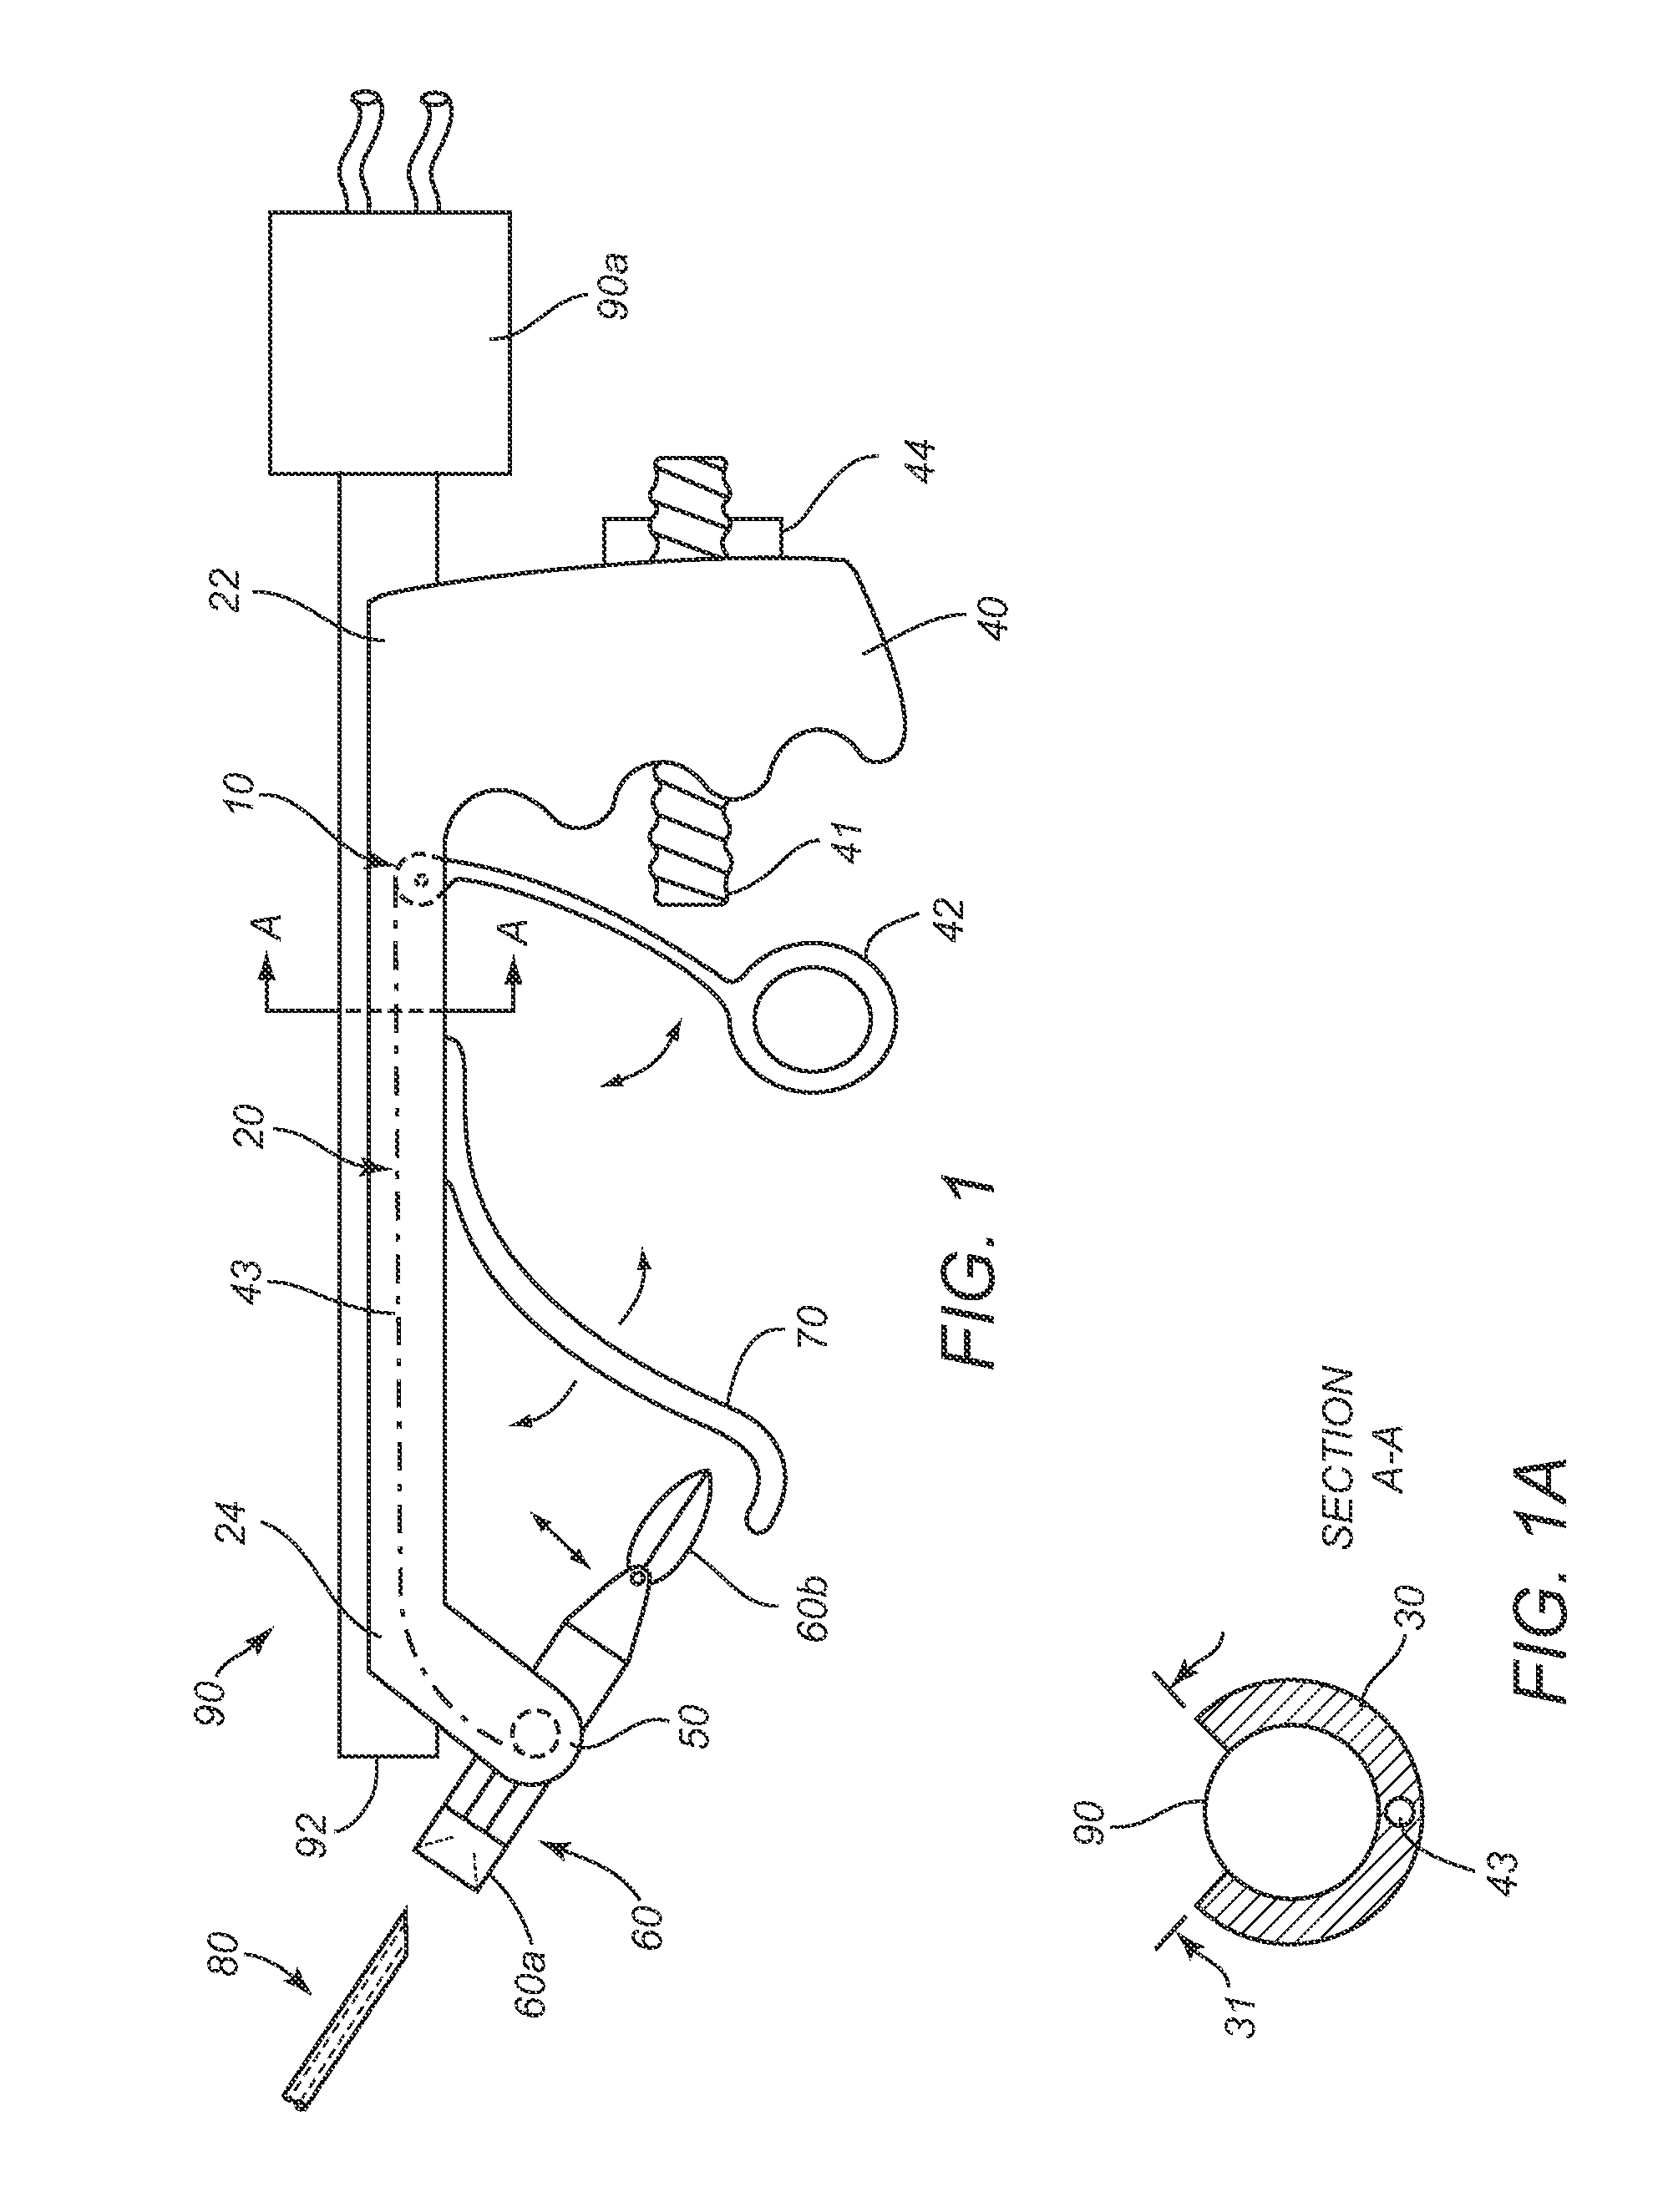 Apparatus, systems, and methods for performing laparoscopic surgery